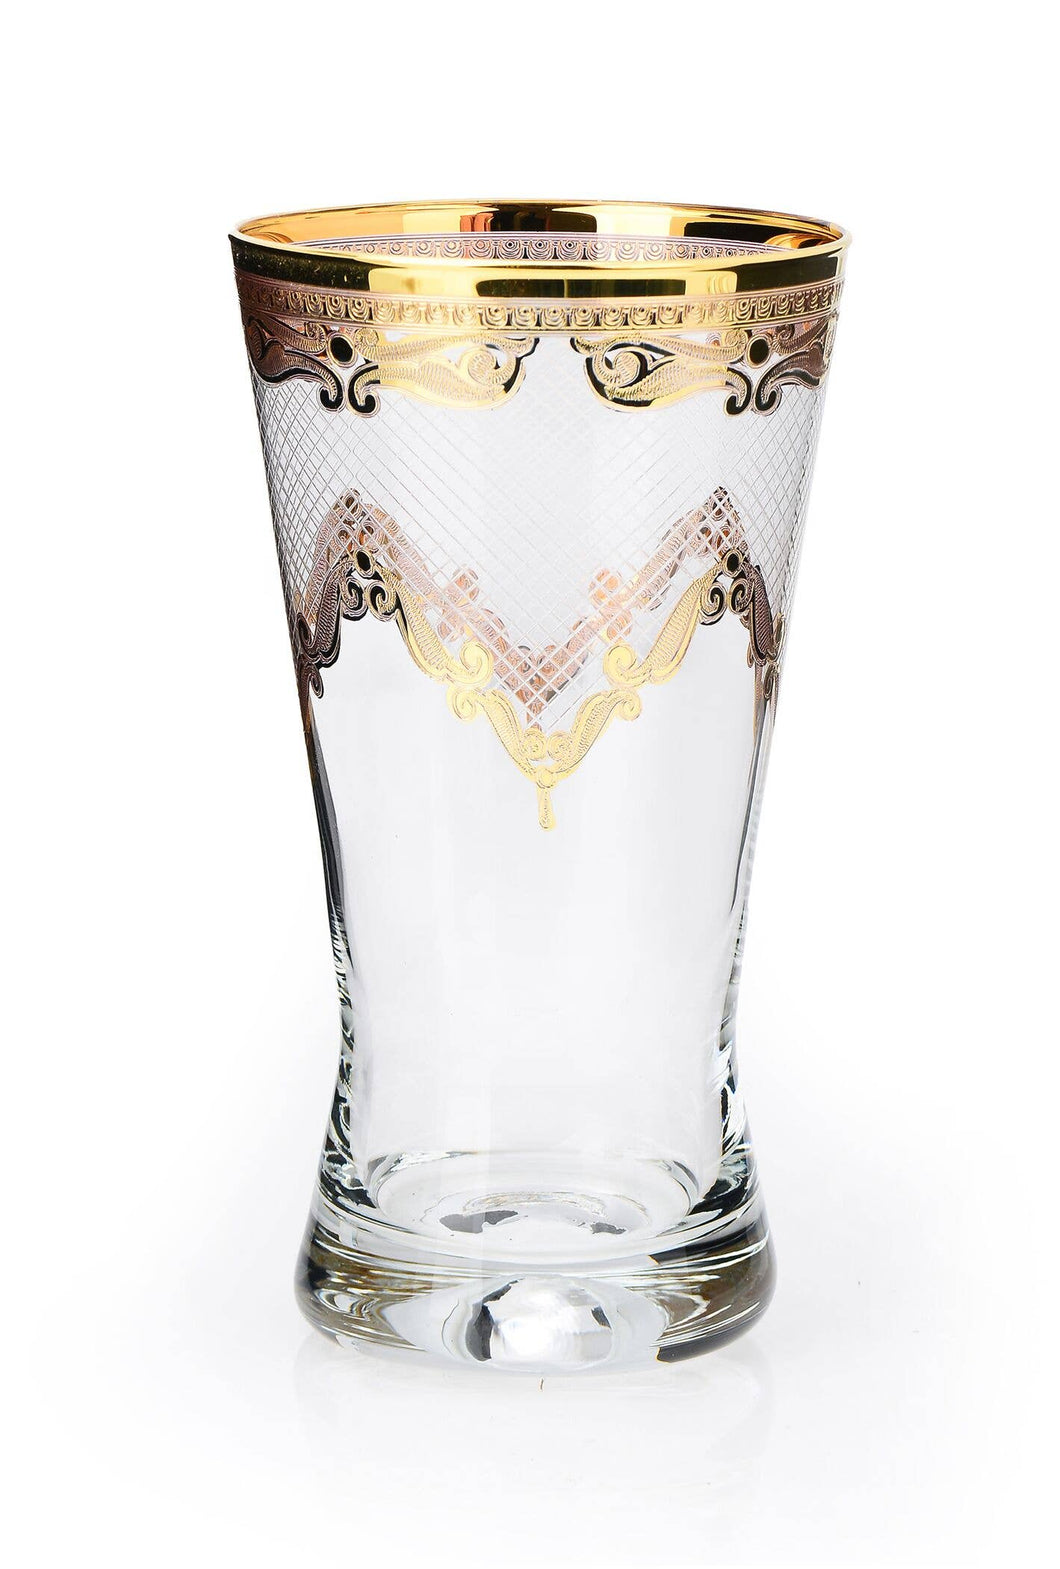 Set of 6 Tumblers with 24k Gold Artwork